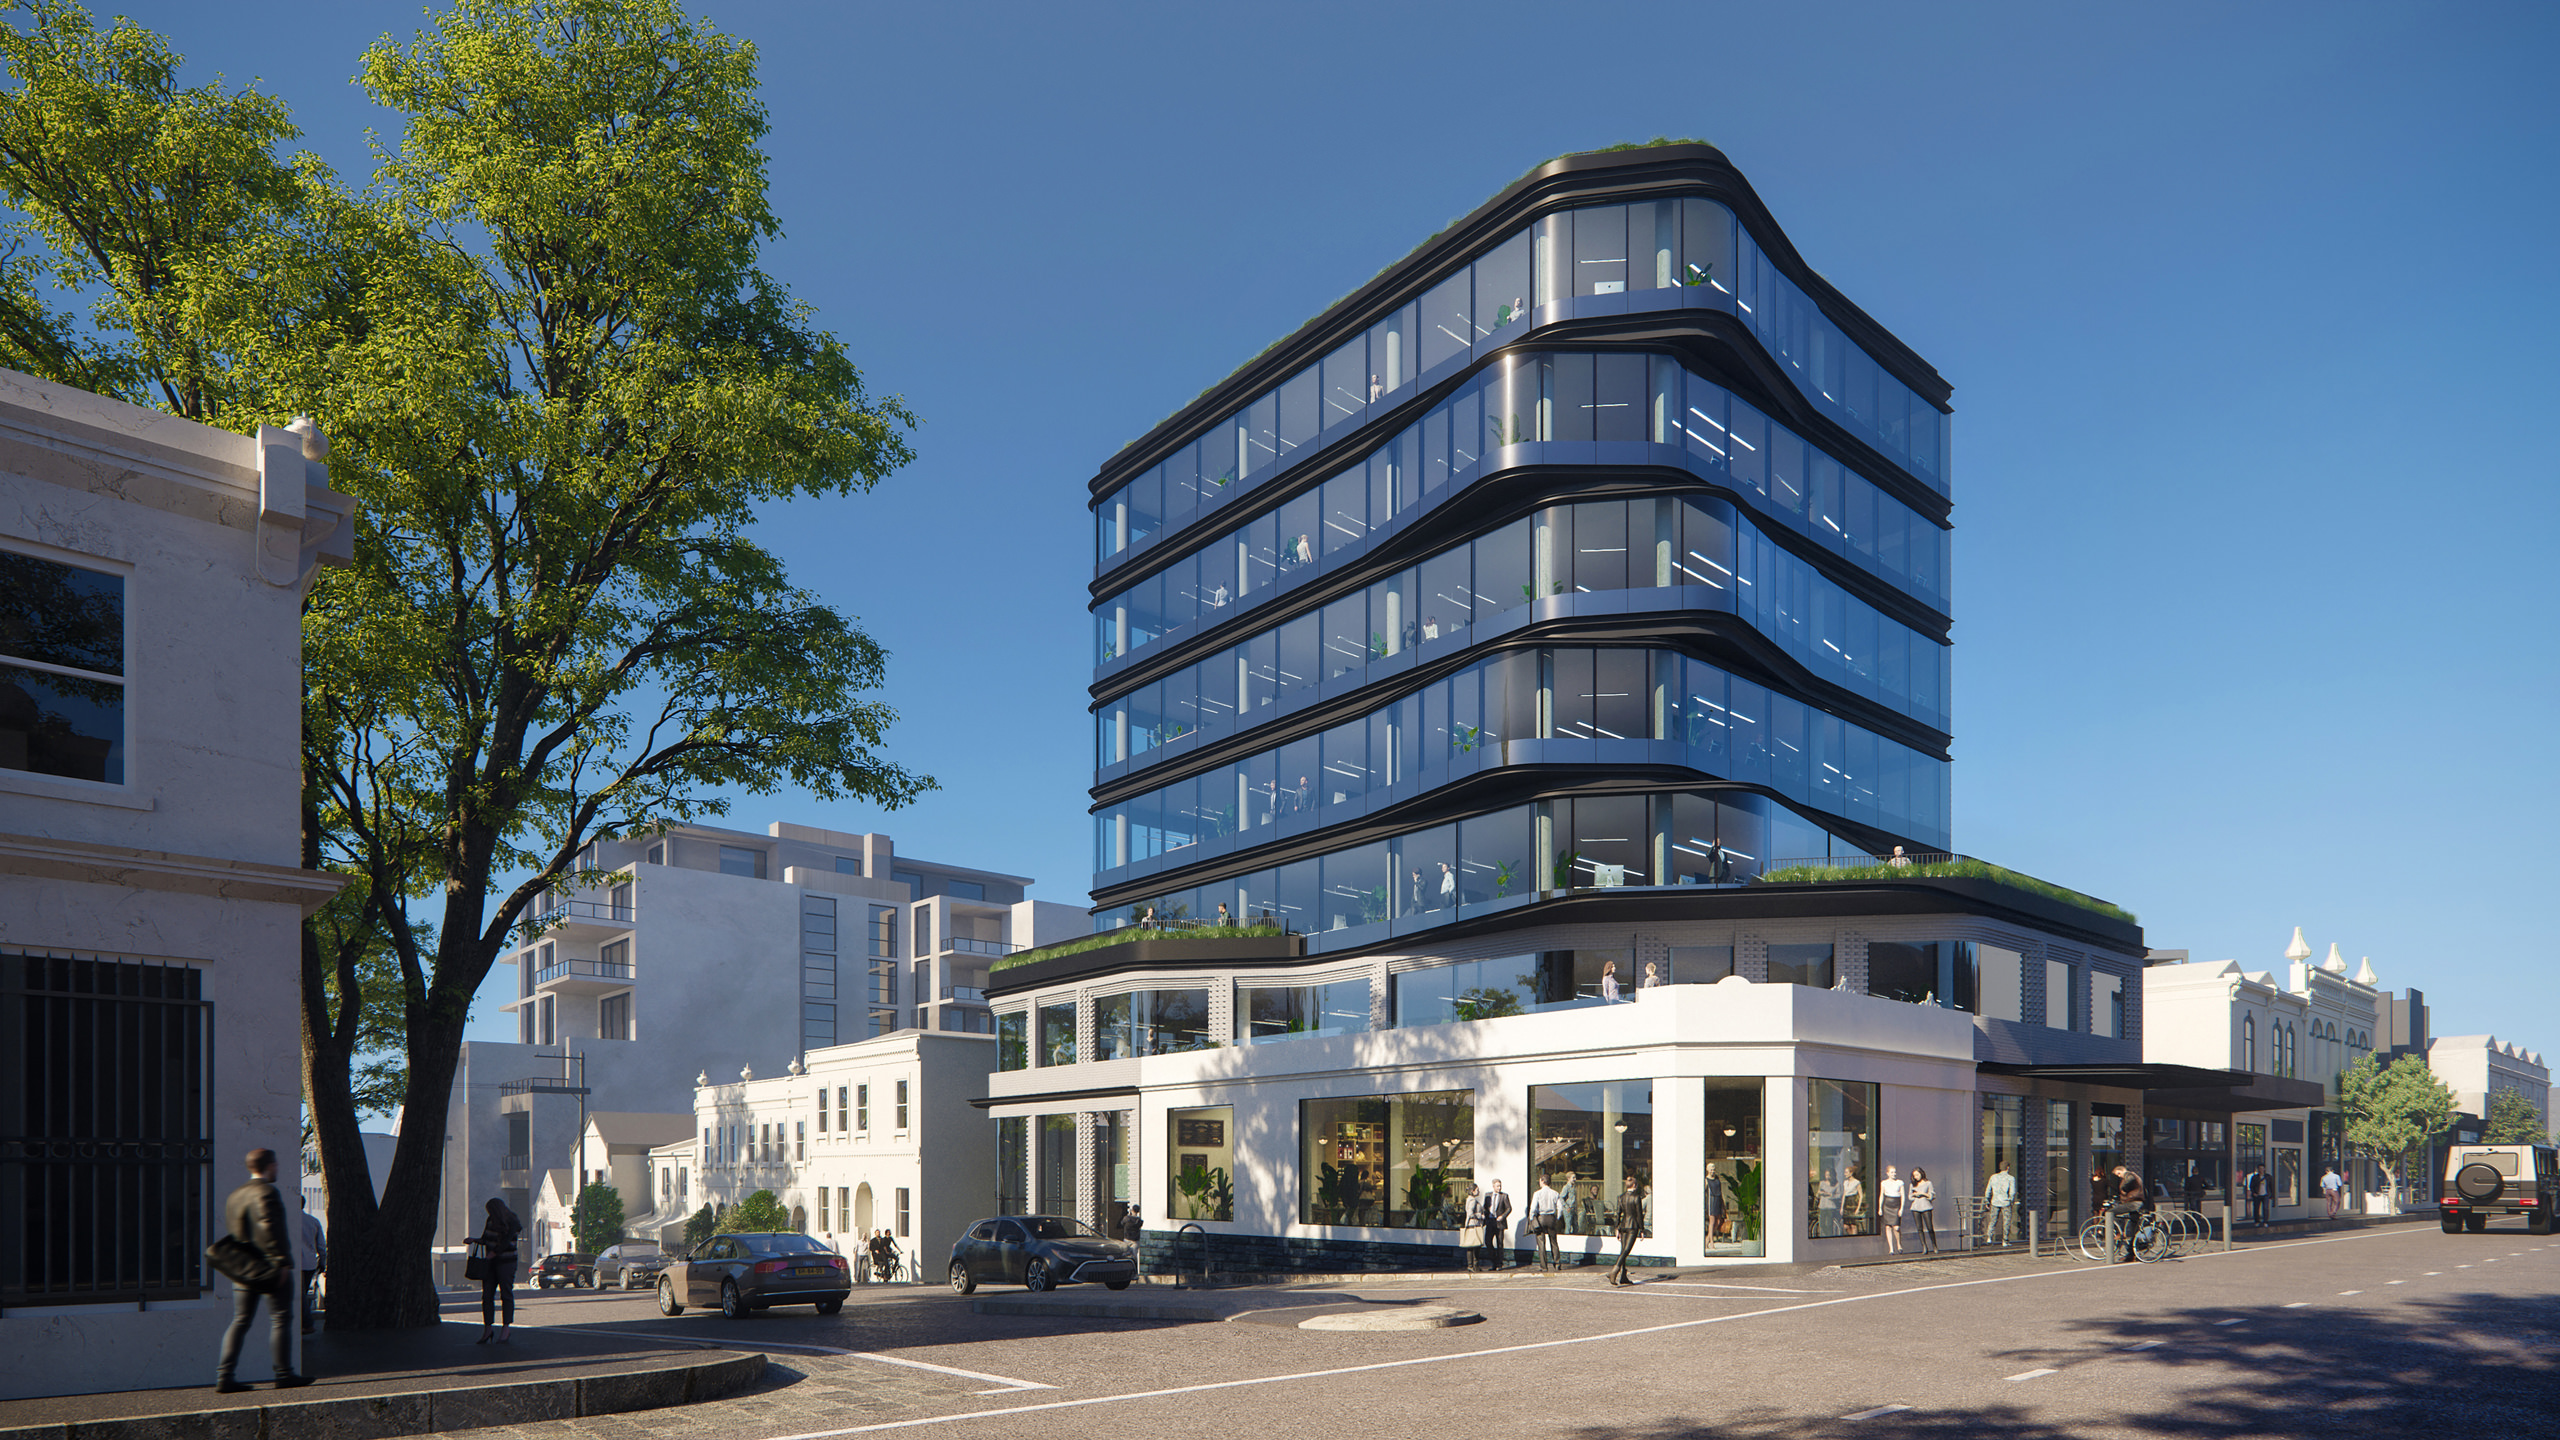 Daytime 3D rendering of glazed commercial levels above a historic building